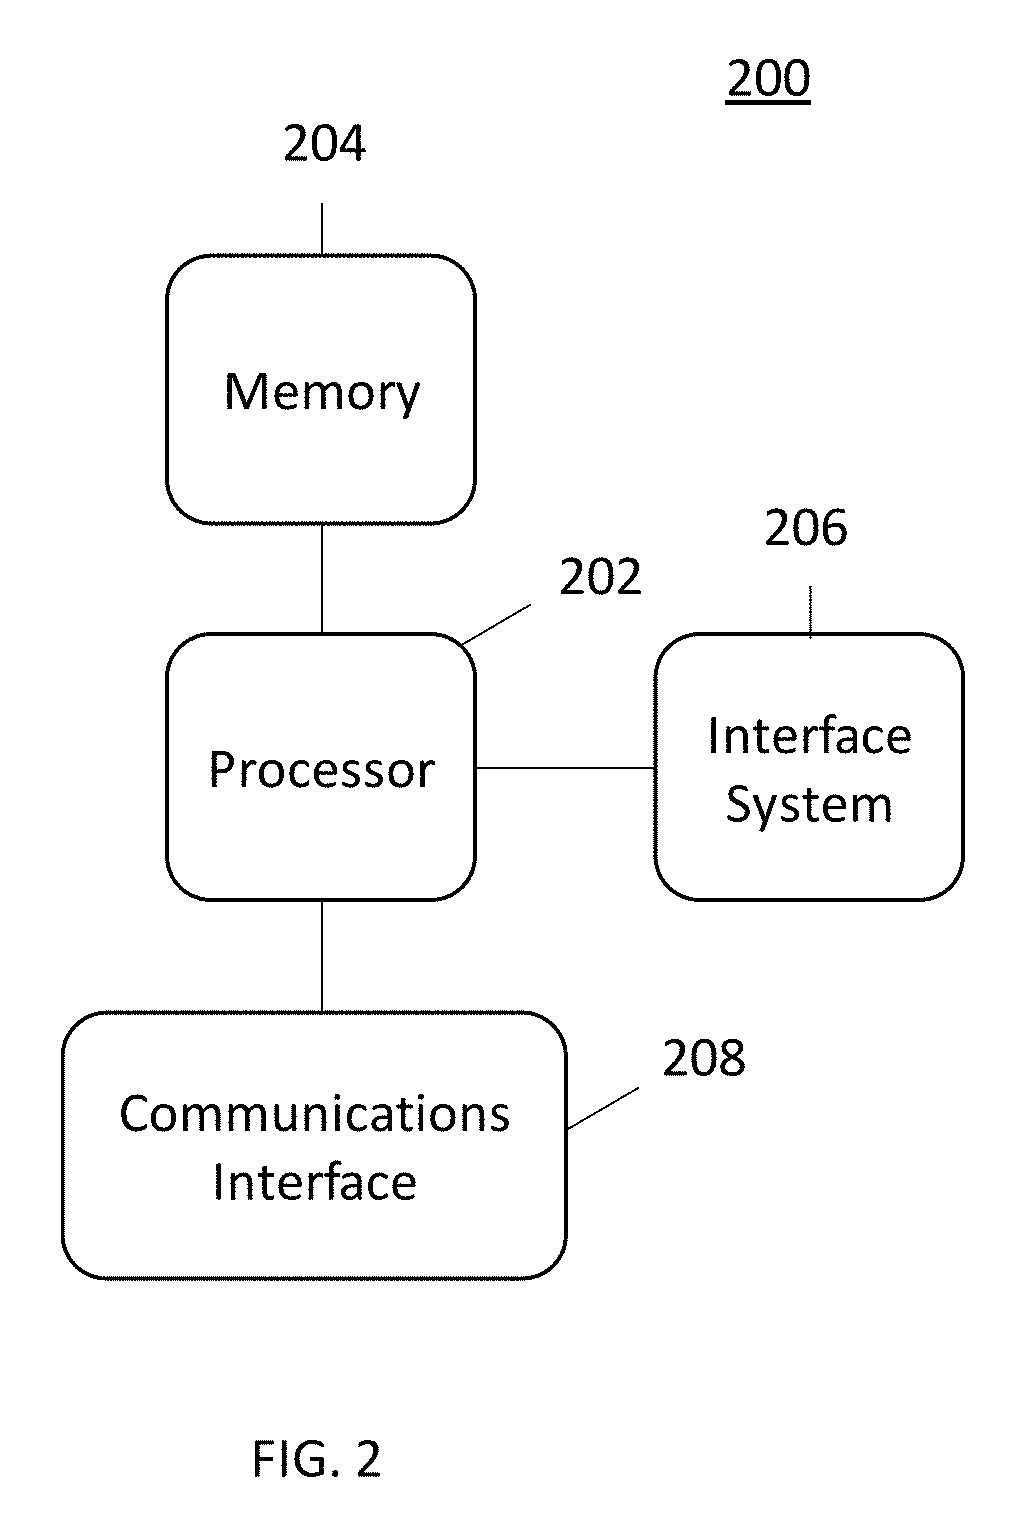 Method and apparatus for proxying access commands to smart object(s) in response to an emergency condition